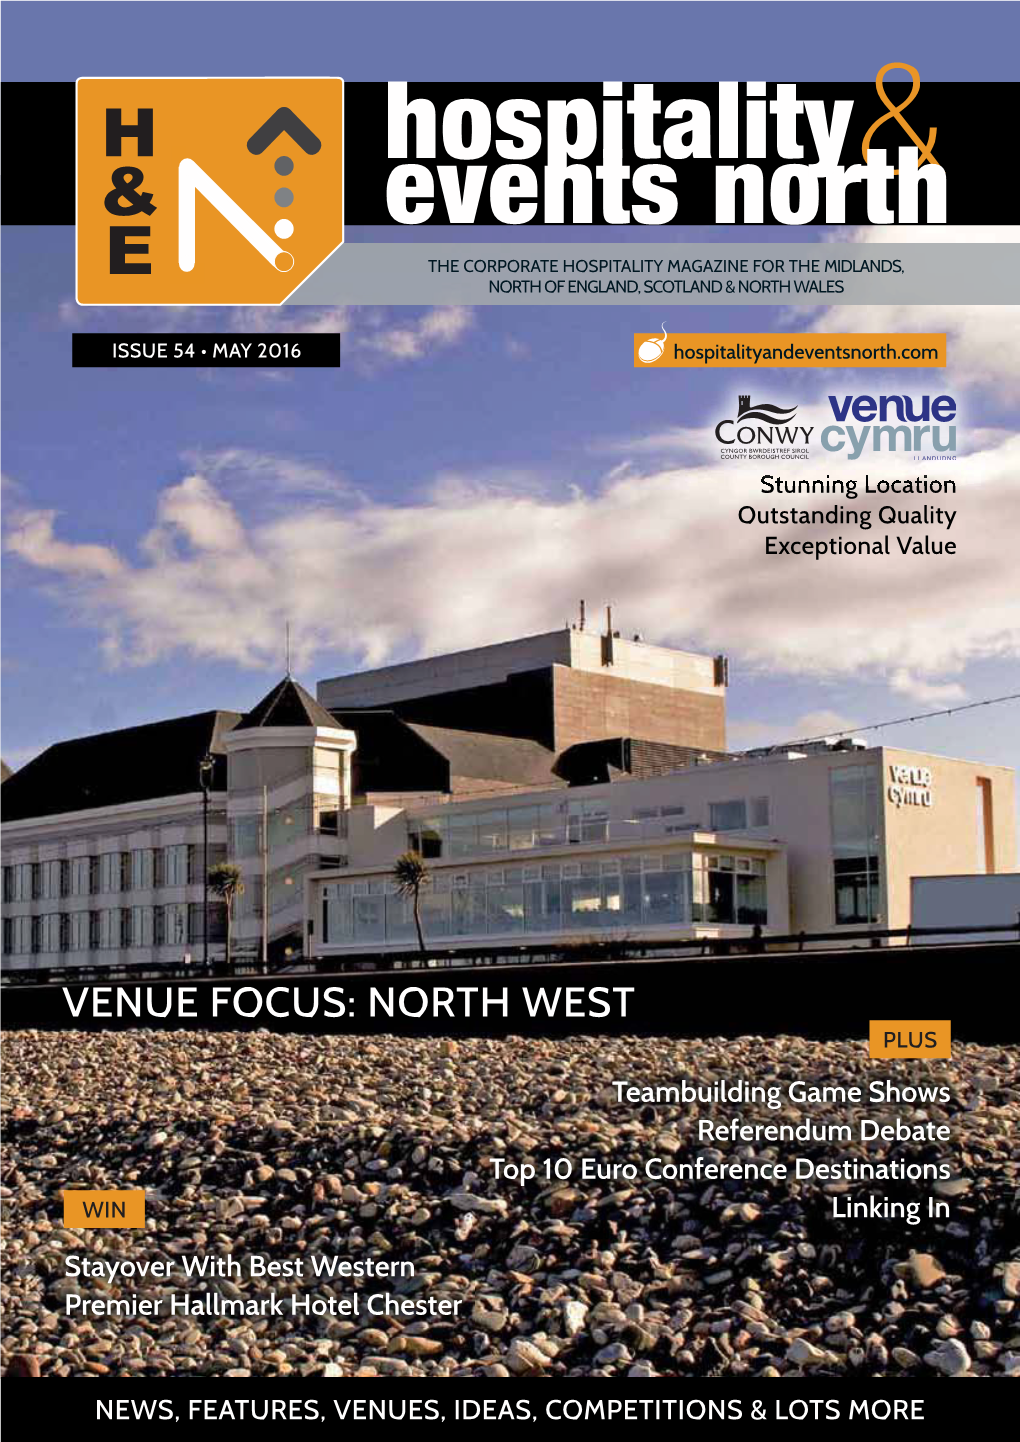 VENUE FOCUS: NORTH WEST PLUS Teambuilding Game Shows Referendum Debate Top 10 Euro Conference Destinations WIN Linking In